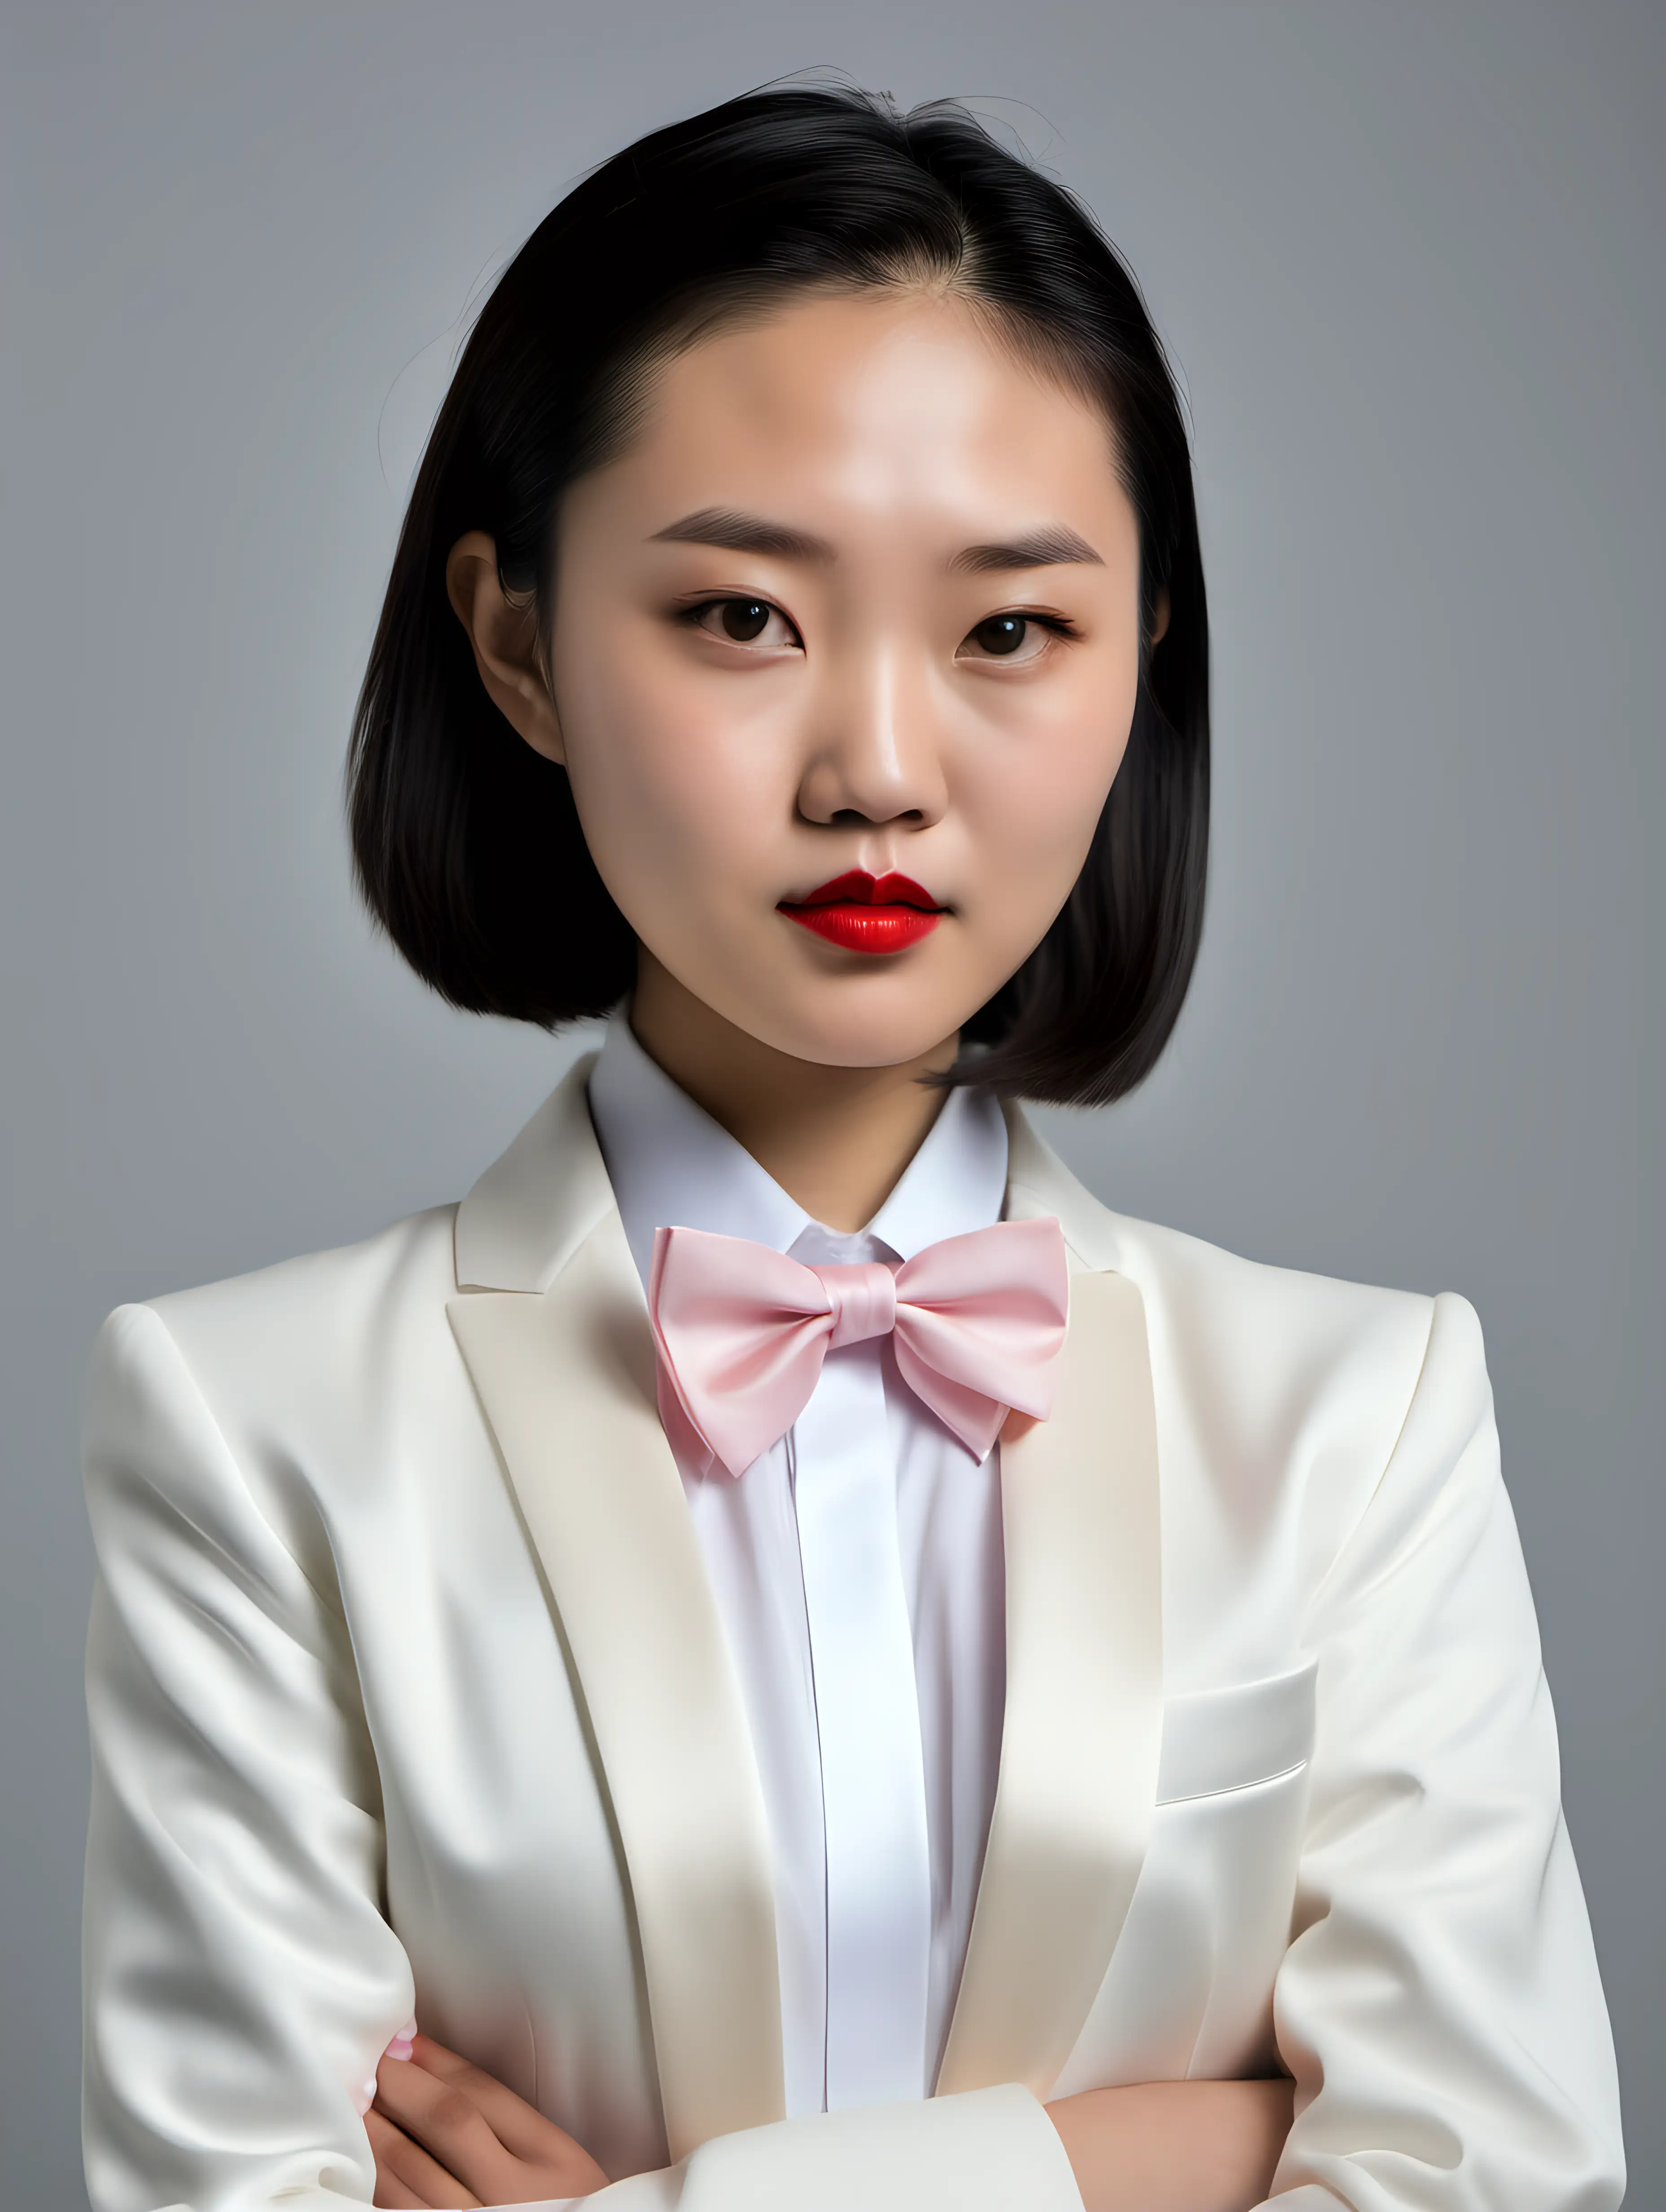 Confident-Chinese-Woman-in-Ivory-Tuxedo-with-Crossed-Arms